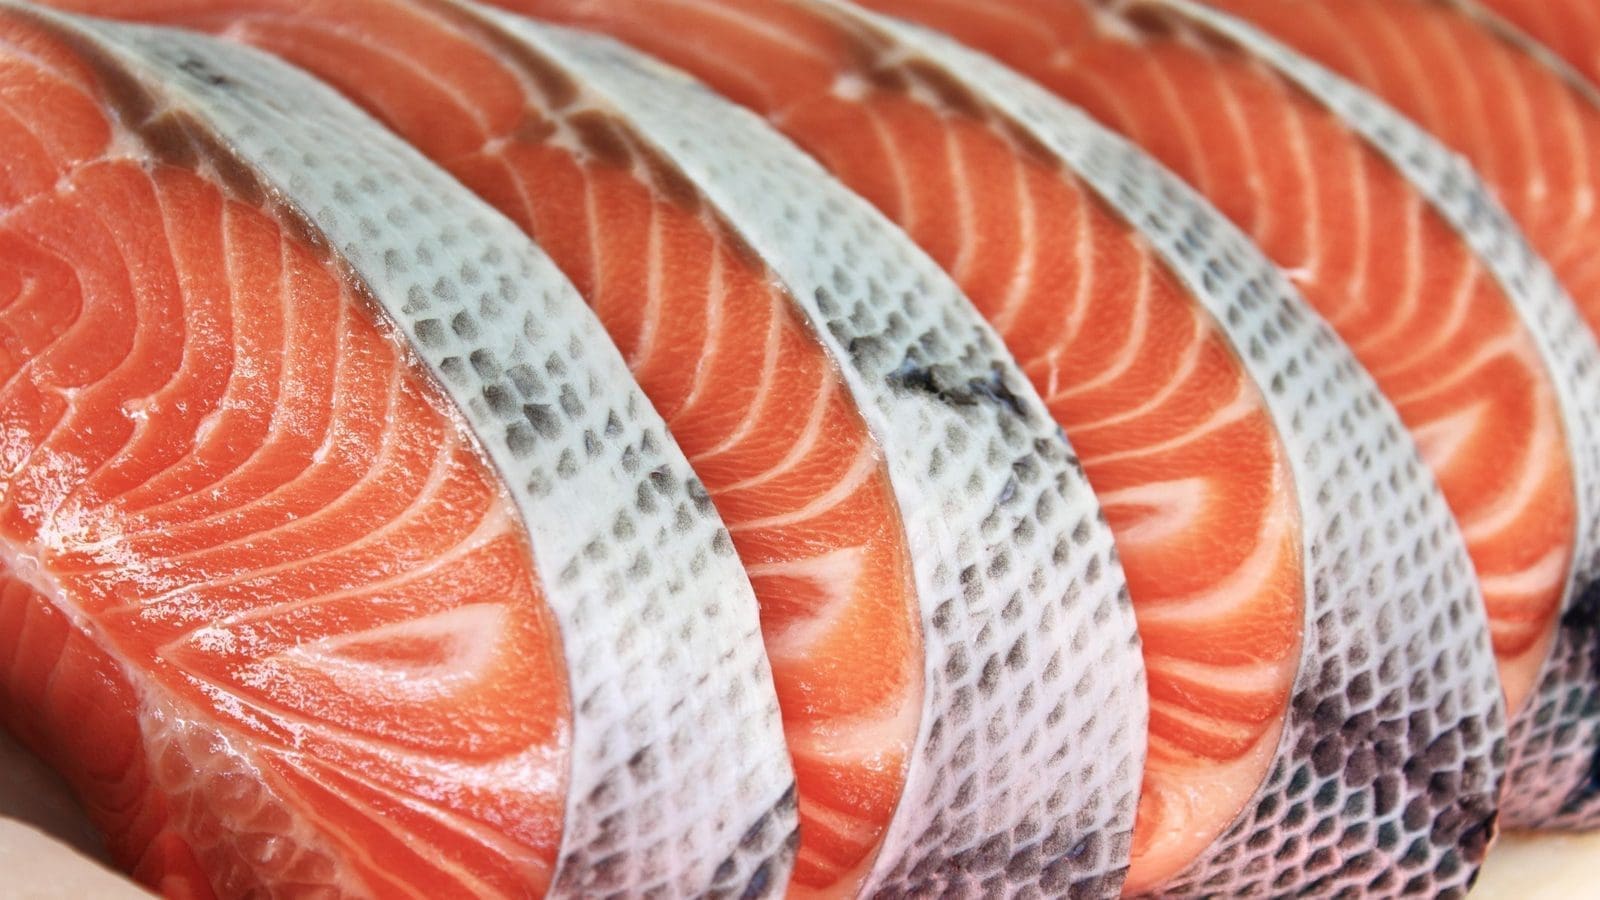 ORIVO, Imprint Analytics partner to provide seafood products’ authentication